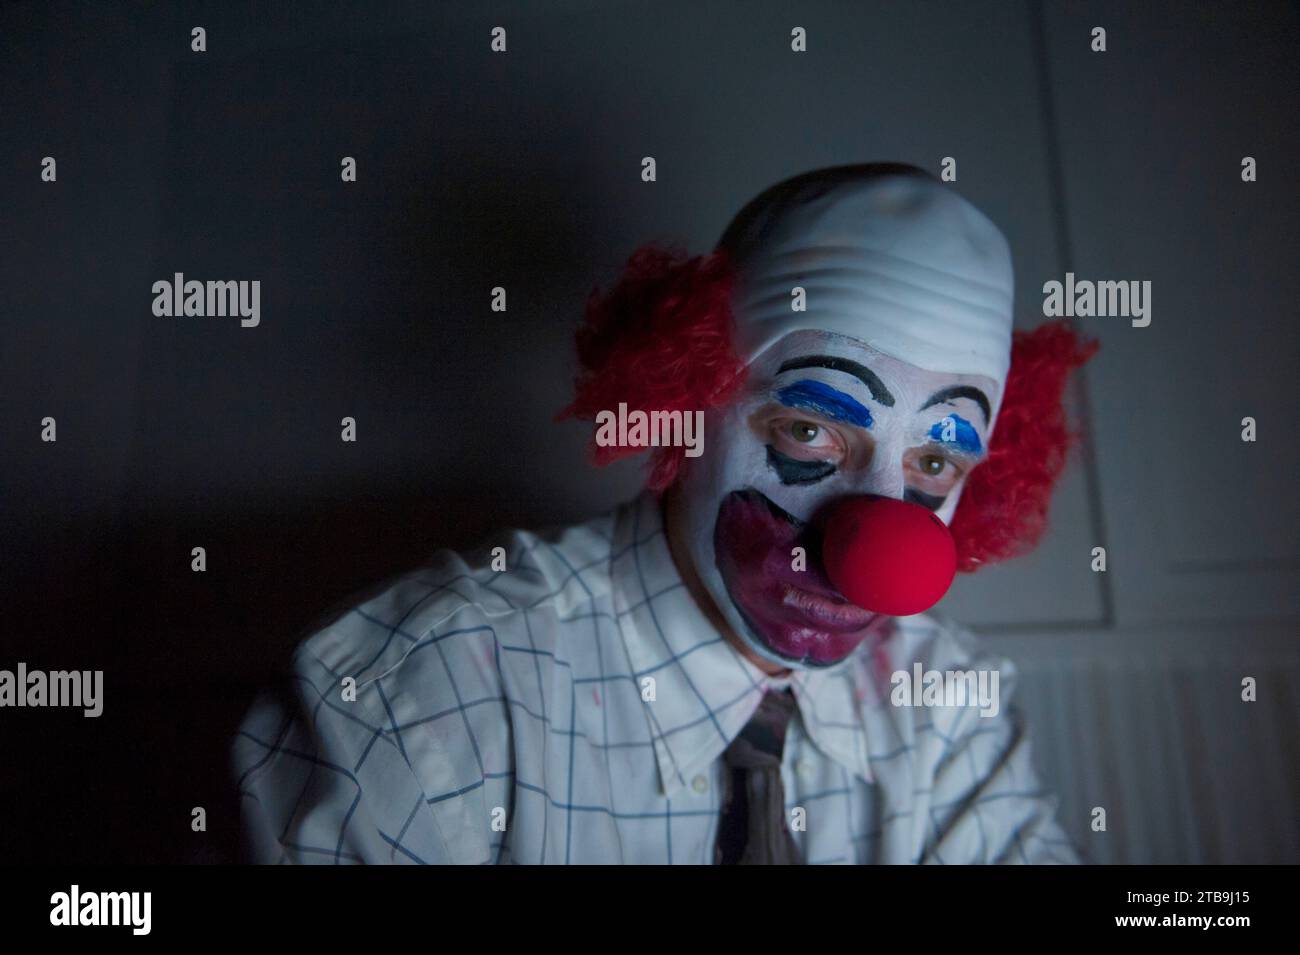 Close-up portrait of a clown sitting by himself in a dark room wearing a shirt and tie; Lincoln, Nebraska, United States of America Stock Photo